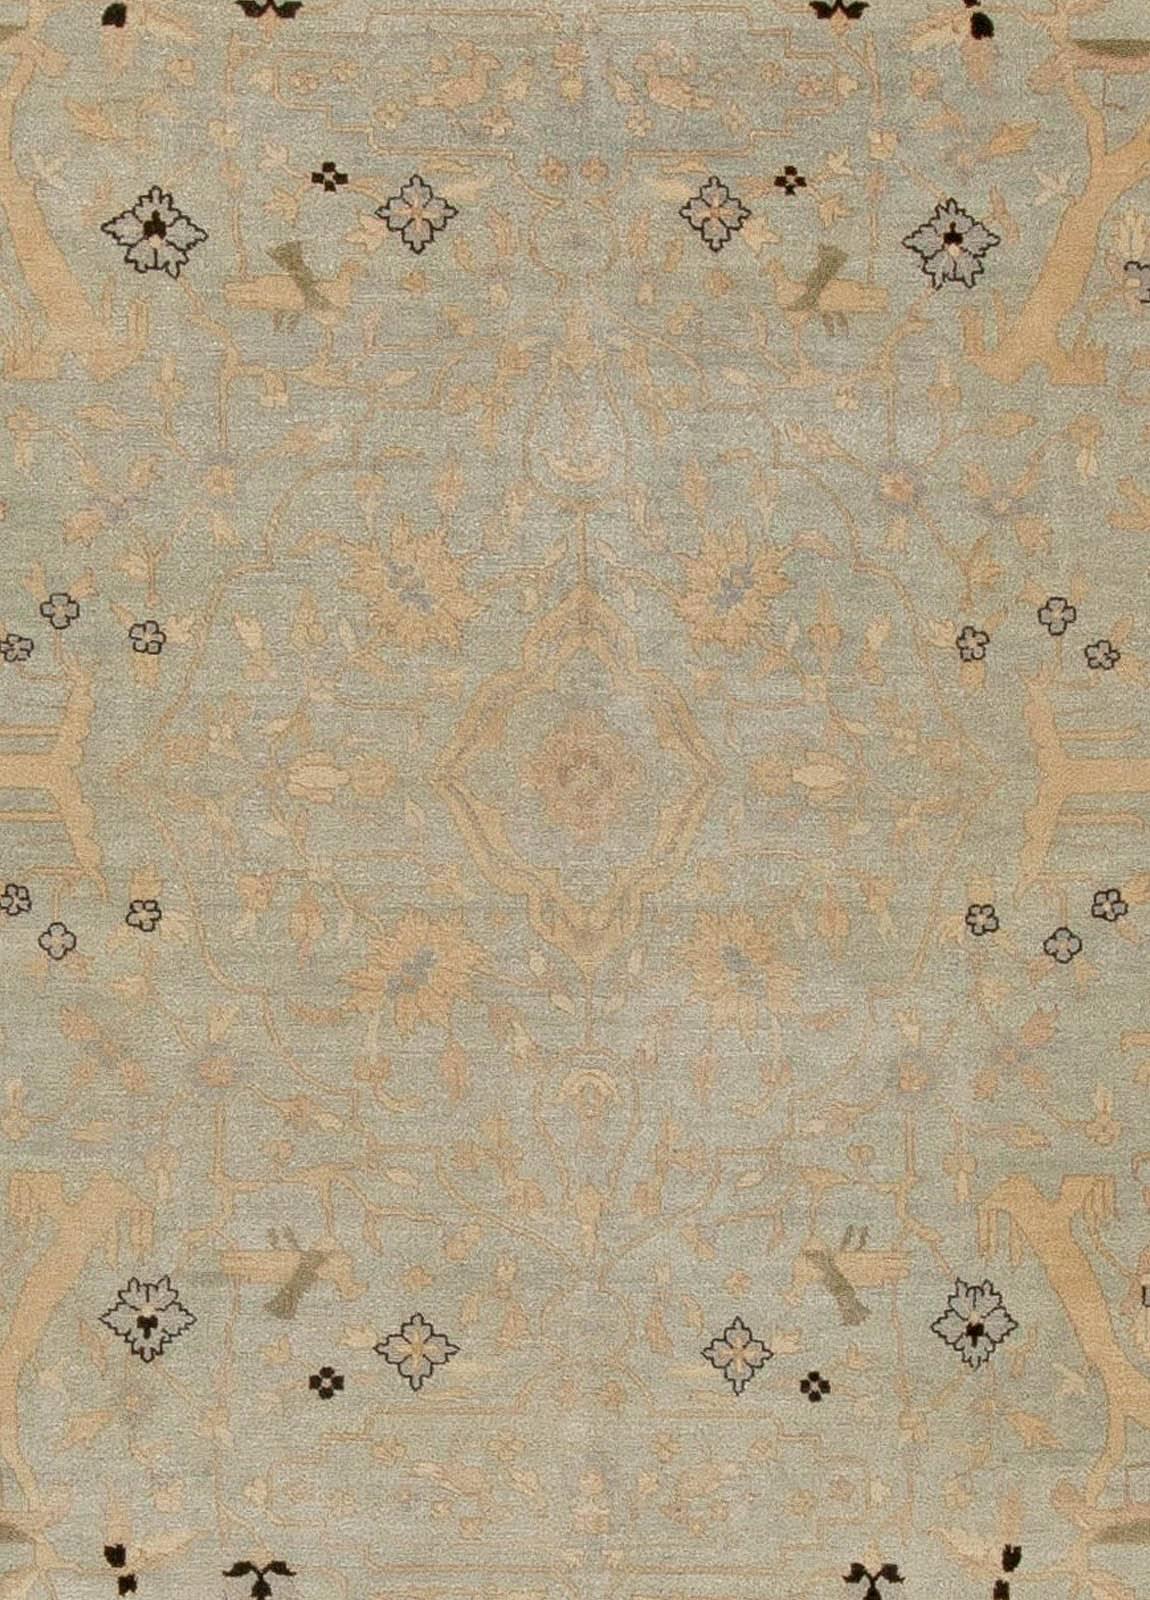 Contemporary Indian Style floral Handmade Wool rug by Doris Leslie Blau
Size: 13'0